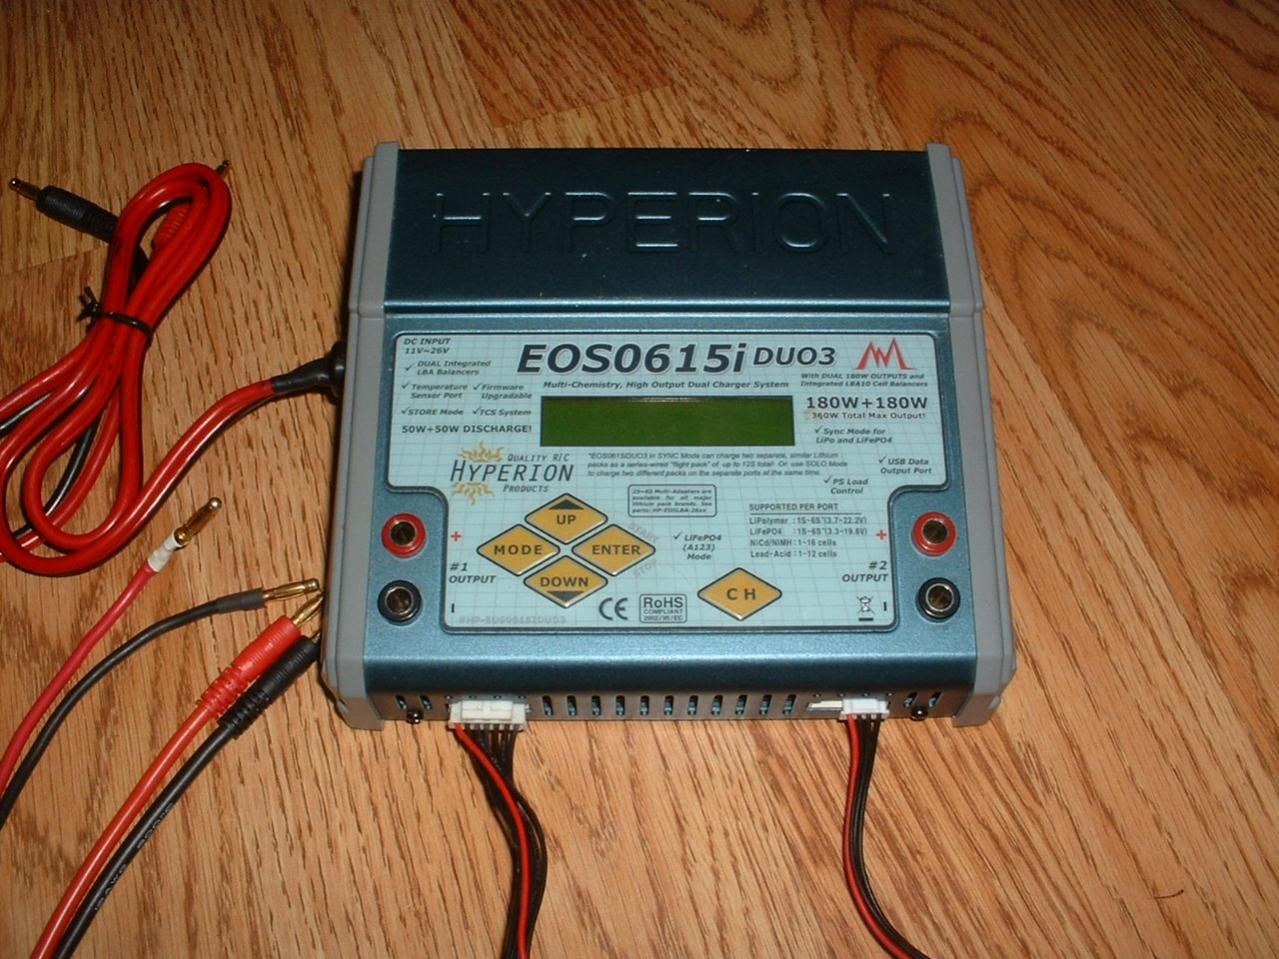 F/S Hyperion EOS 615i Duo3 Lipo charger EOS0615i - R/C Tech Forums